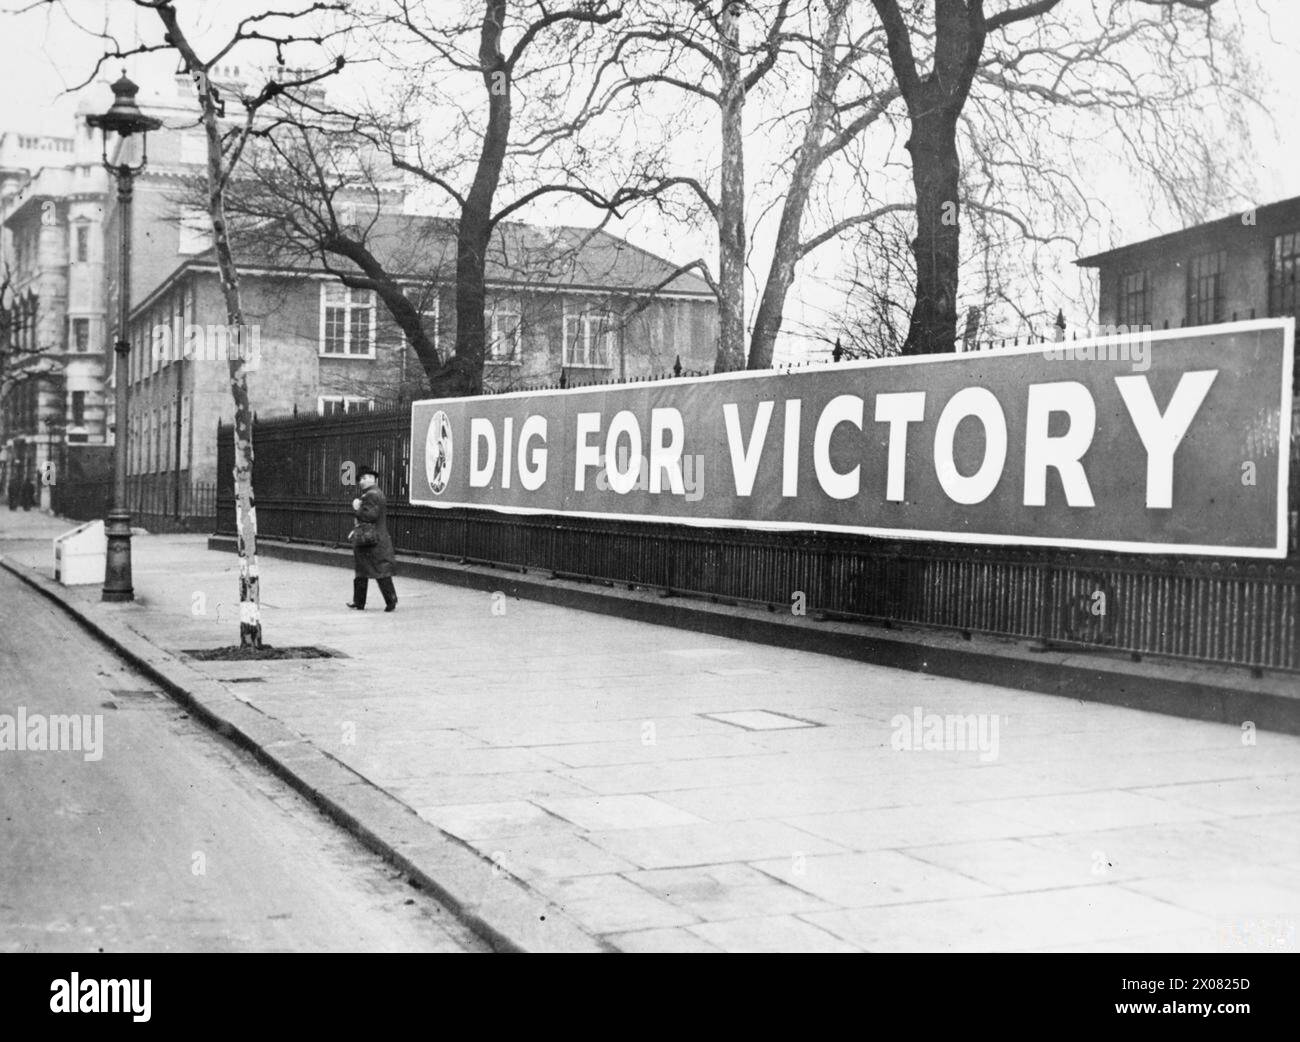 MINISTRY OF INFORMATION CAMPAIGN POSTERS, LONDON, UK, 1940 - A civilian walks past a large horizontal 'Dig for Victory' poster, which can be seen on railings somewhere in London Stock Photo